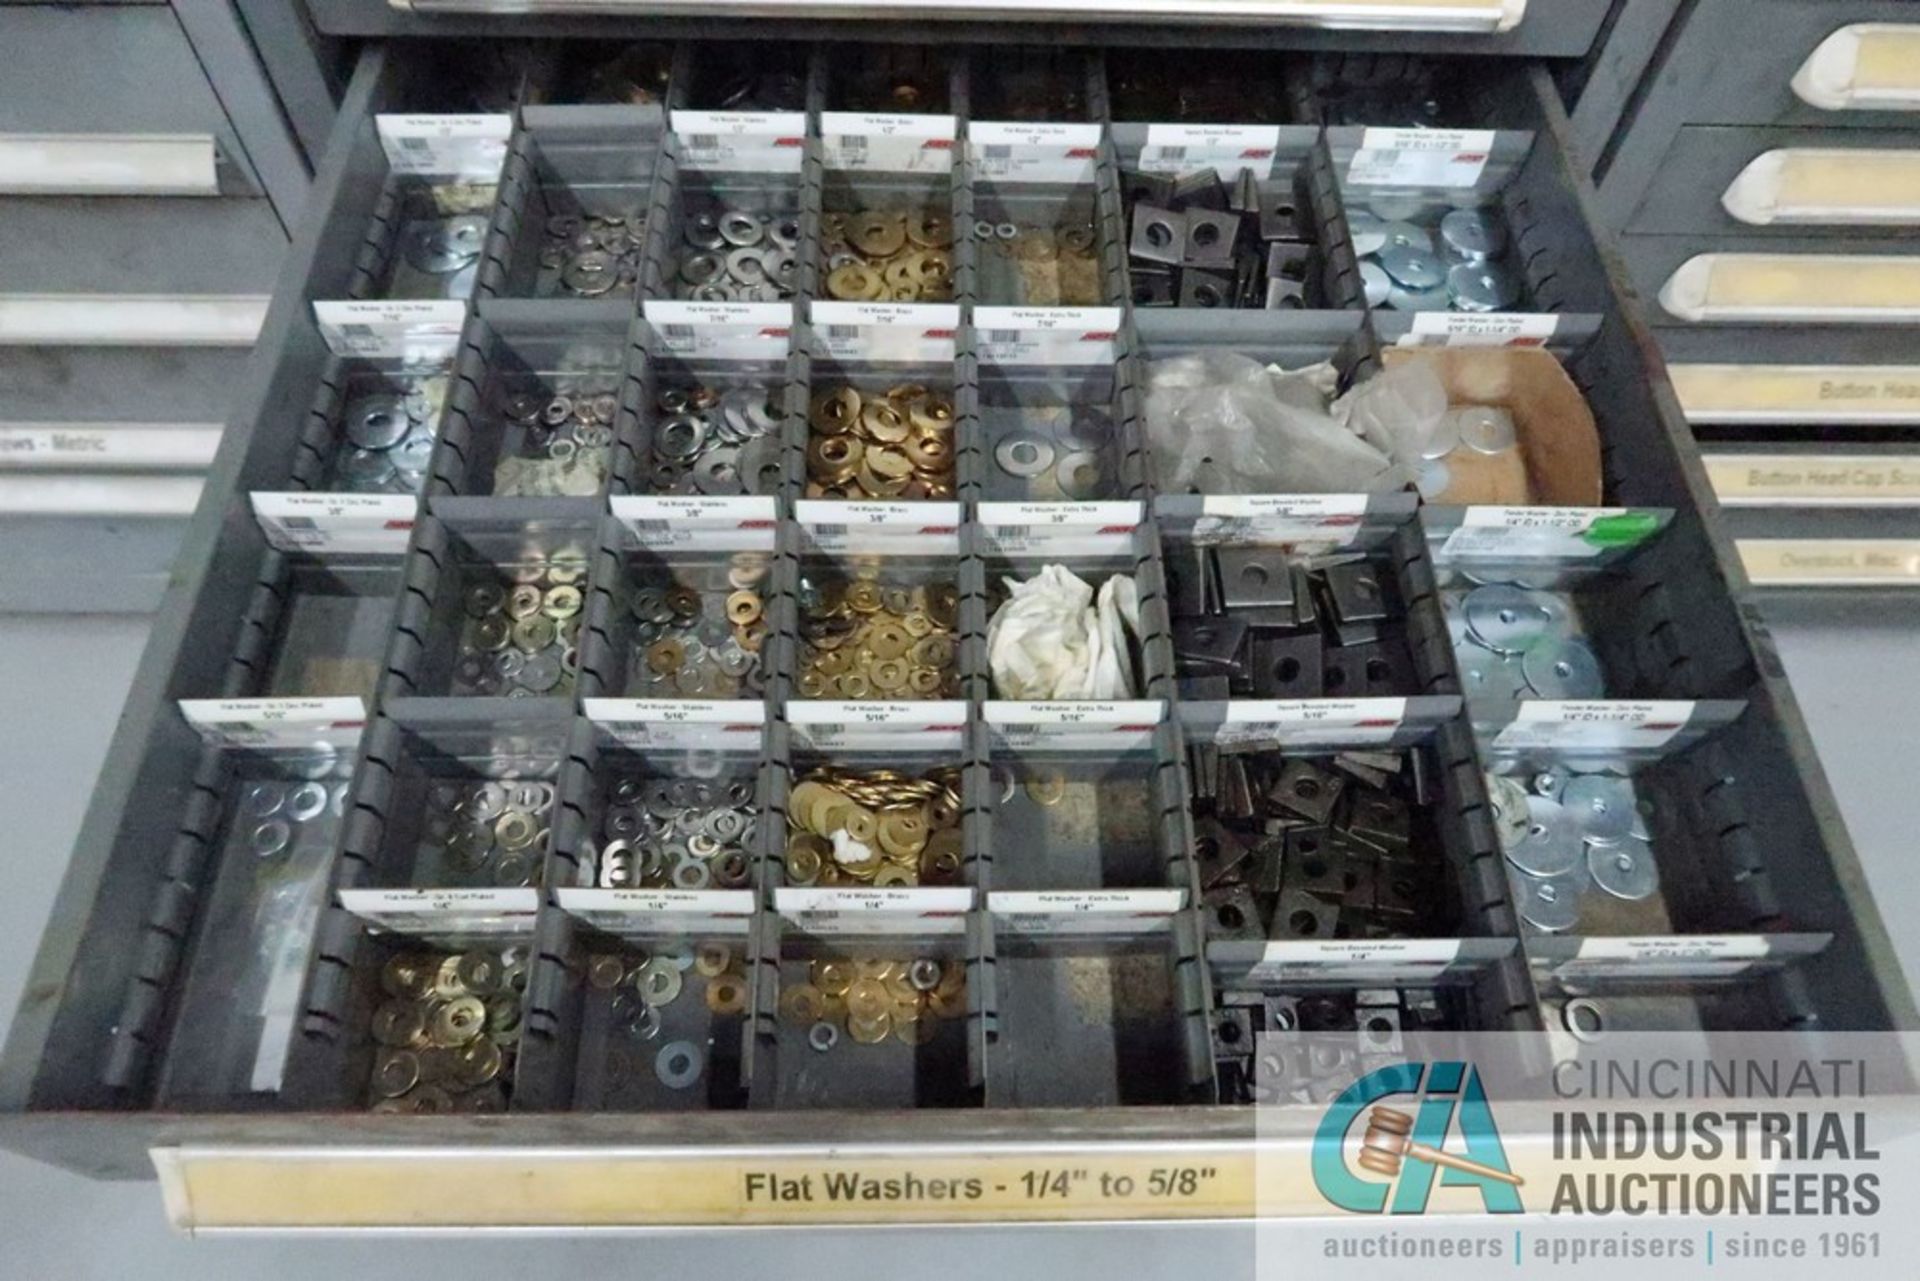 (LOT) 13-DRAWER VIDMAR CABINET WITH CONTENTS INCLUDING WING NUTS, HEX NUTS, LOCK WASHERS (CABINET - Image 11 of 14